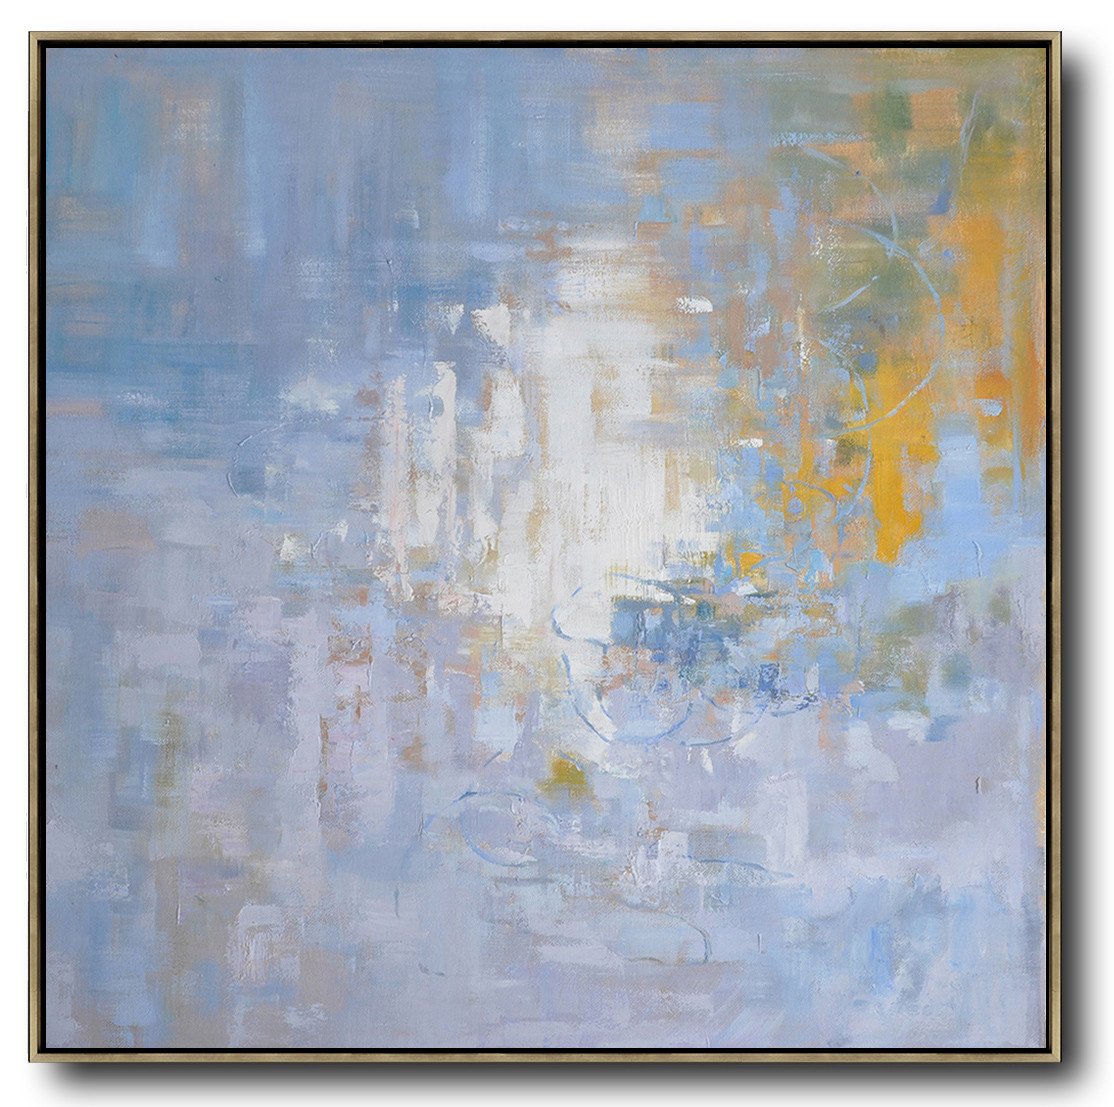 Abstract Painting Extra Large Canvas Art,Oversized Abstract Landscape Oil Painting,Giant Canvas Wall Art,Blue,Yellow,White.etc